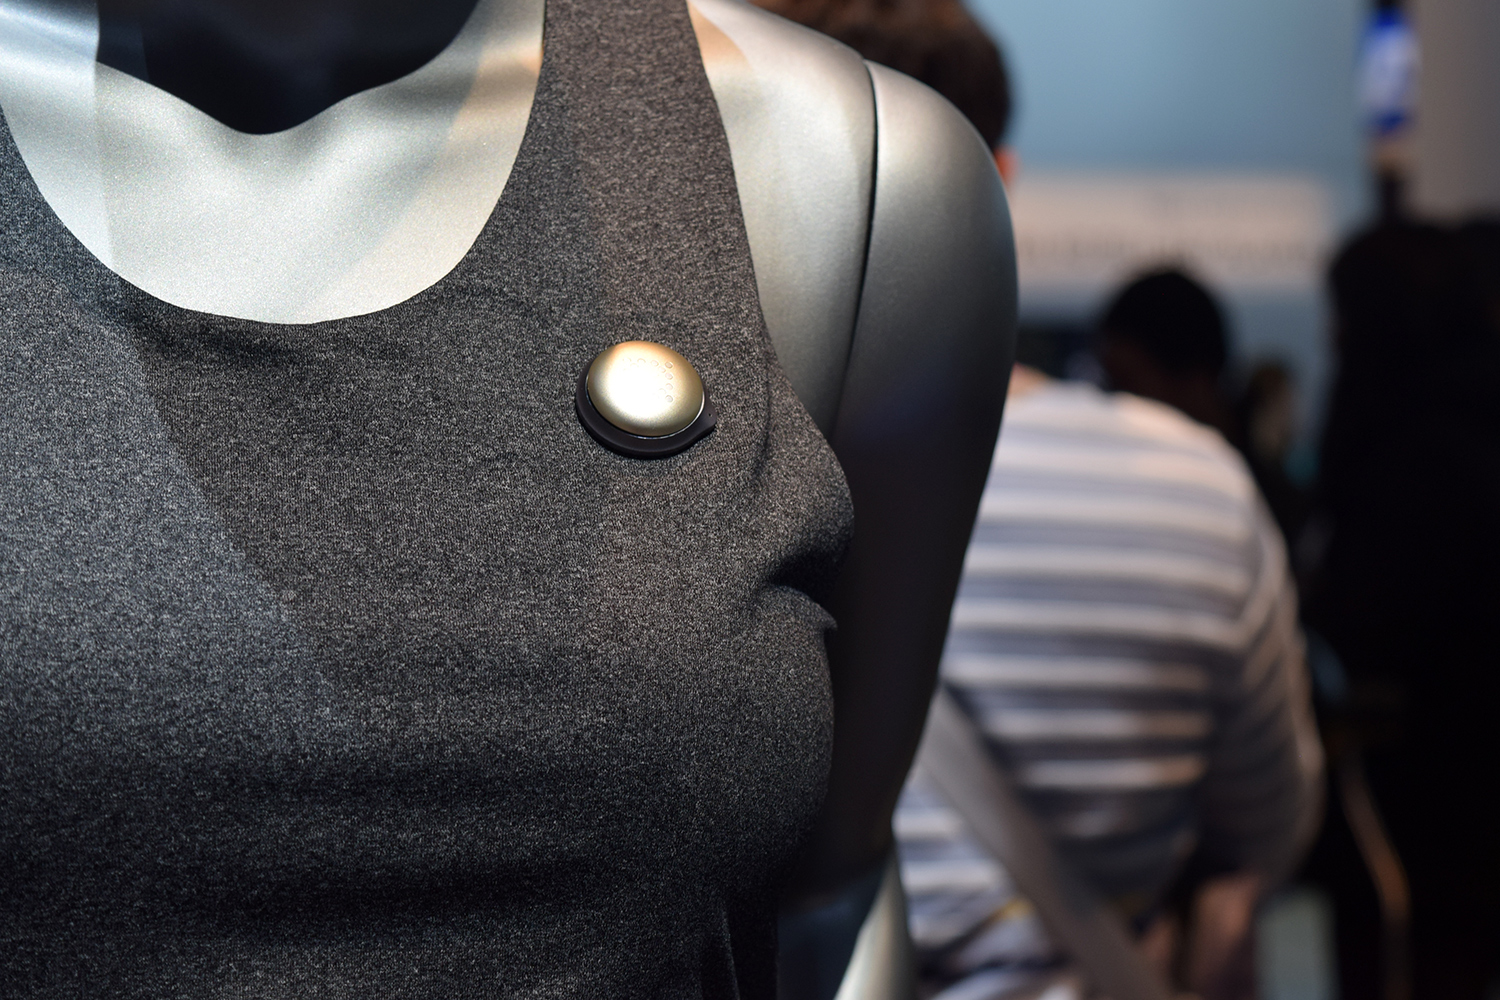 Smart Underwear Could Be the Future of Smart Wearables